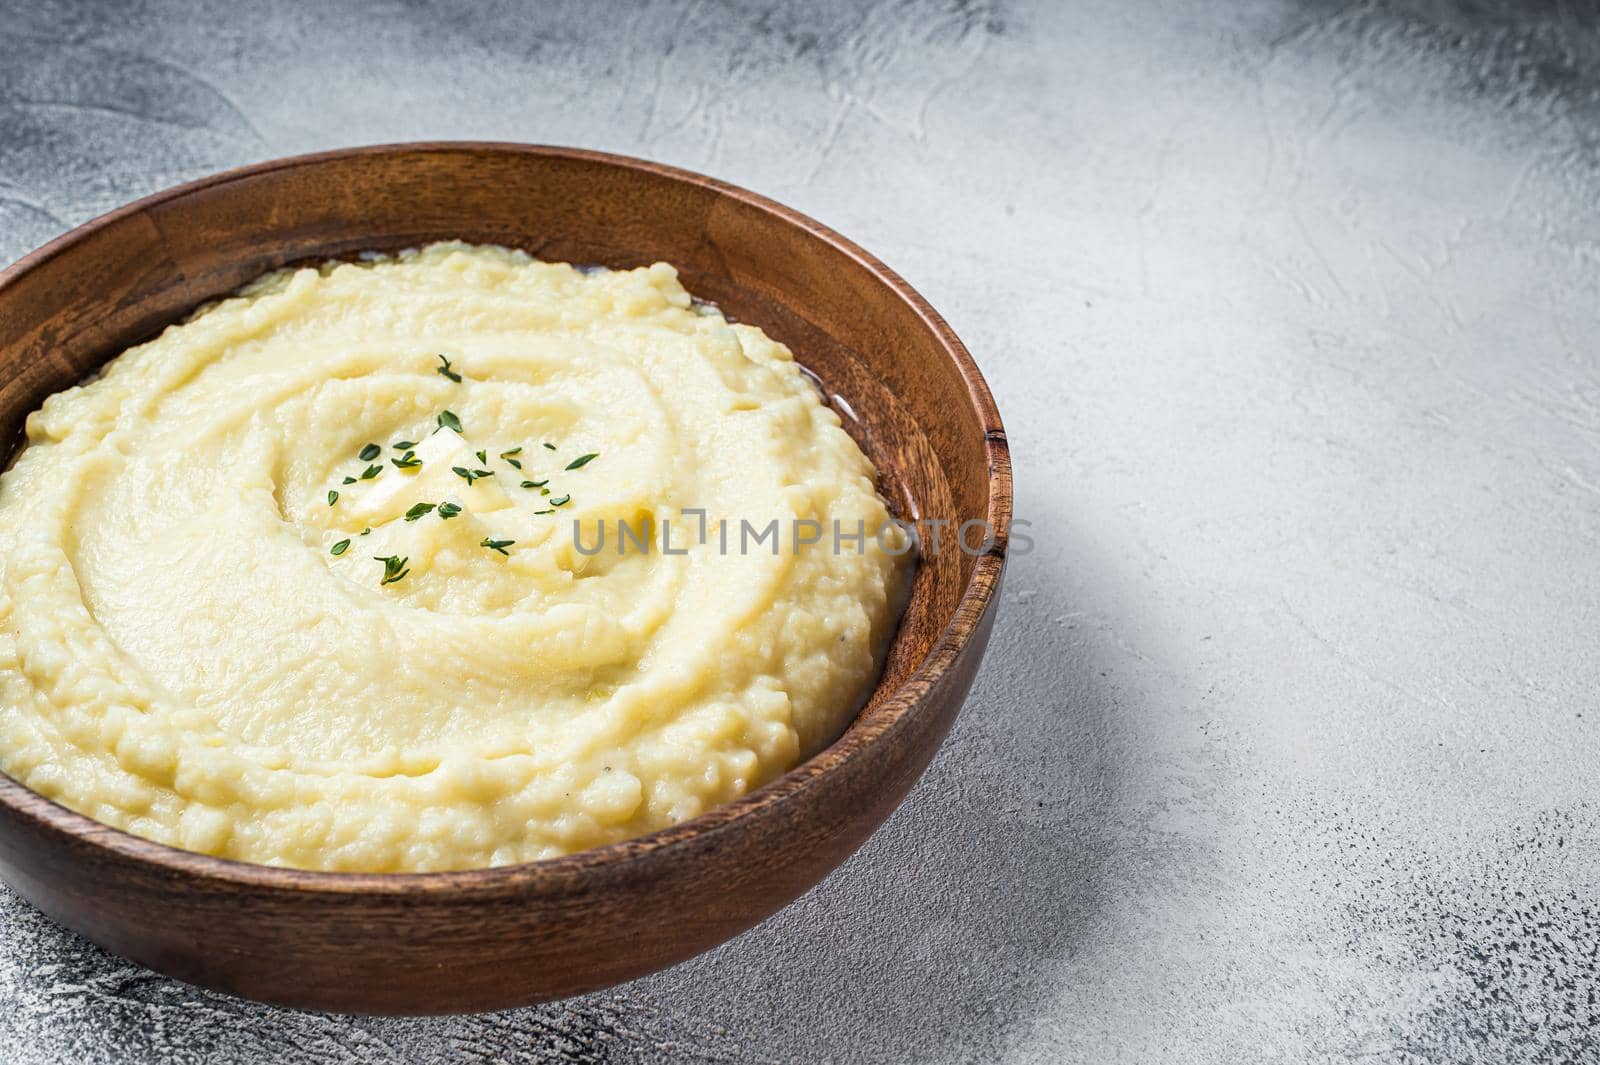 Boiled potato puree, Mashed potatoes in a wooden plate. White background. Top view. Copy space.